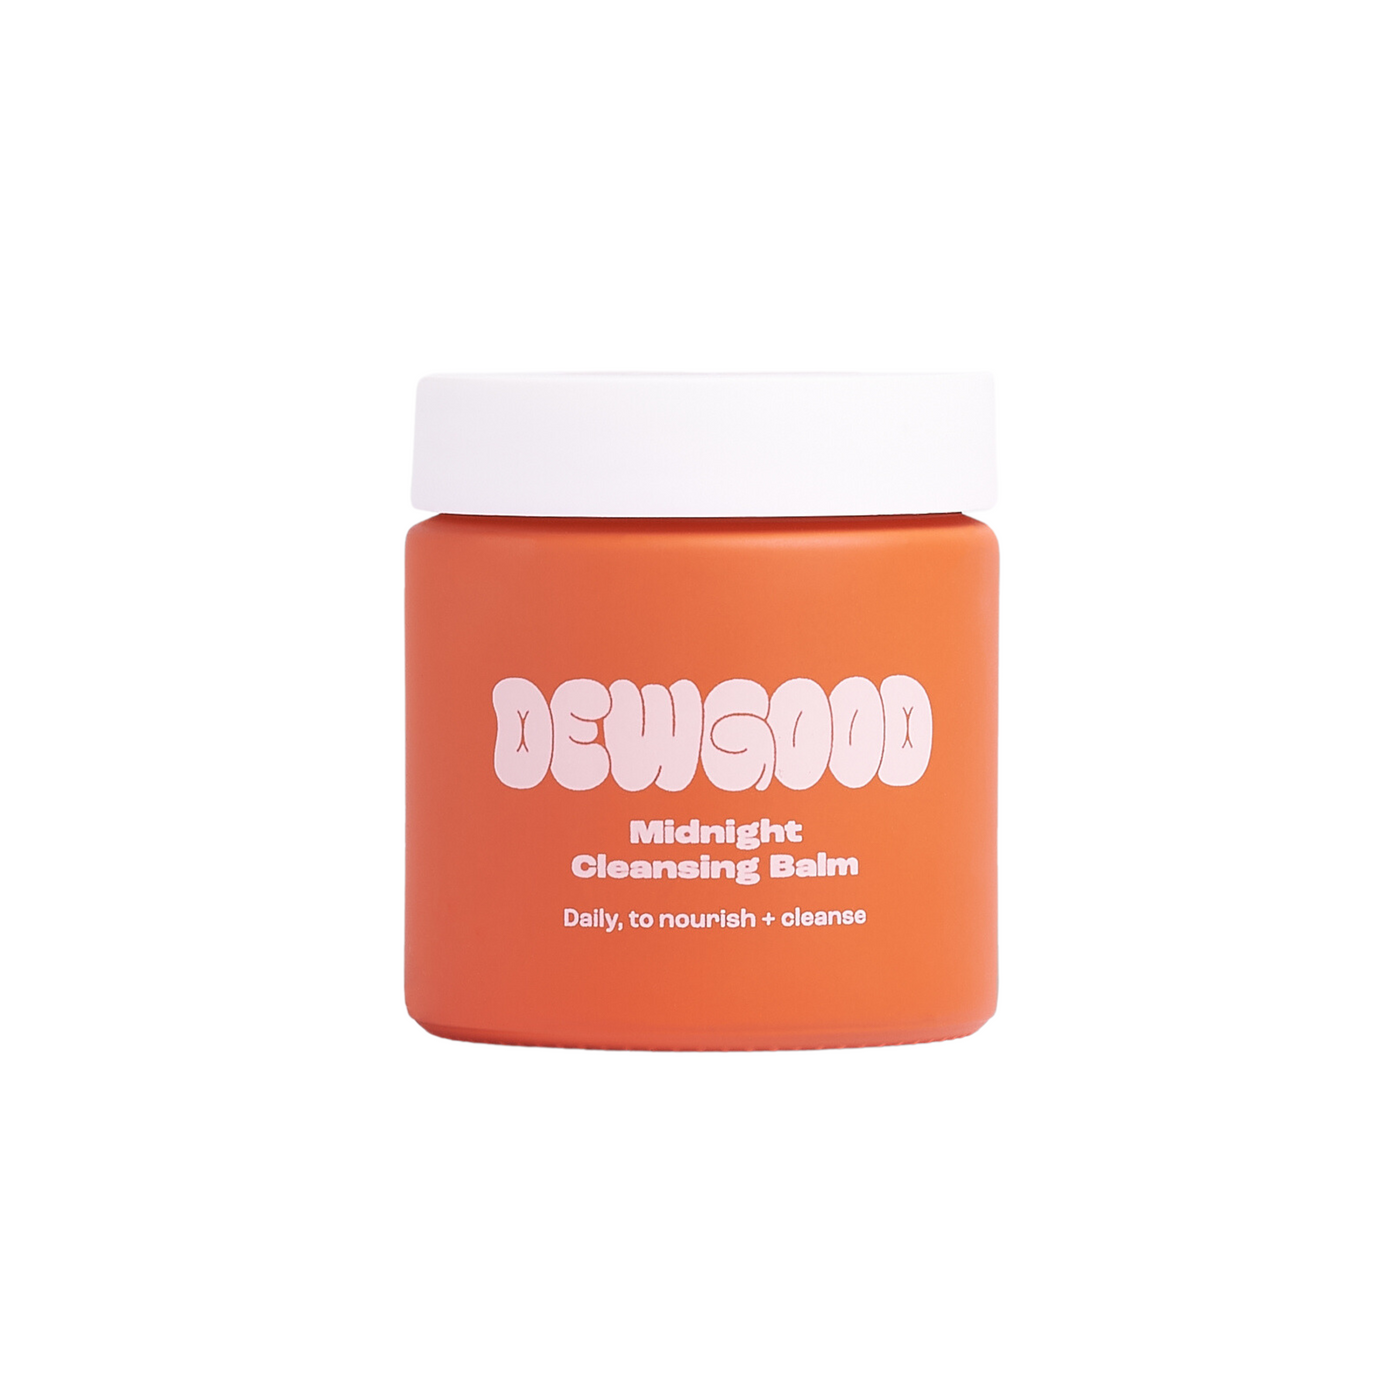 Dewgood Midnight Cleansing Balm - Radical Giving